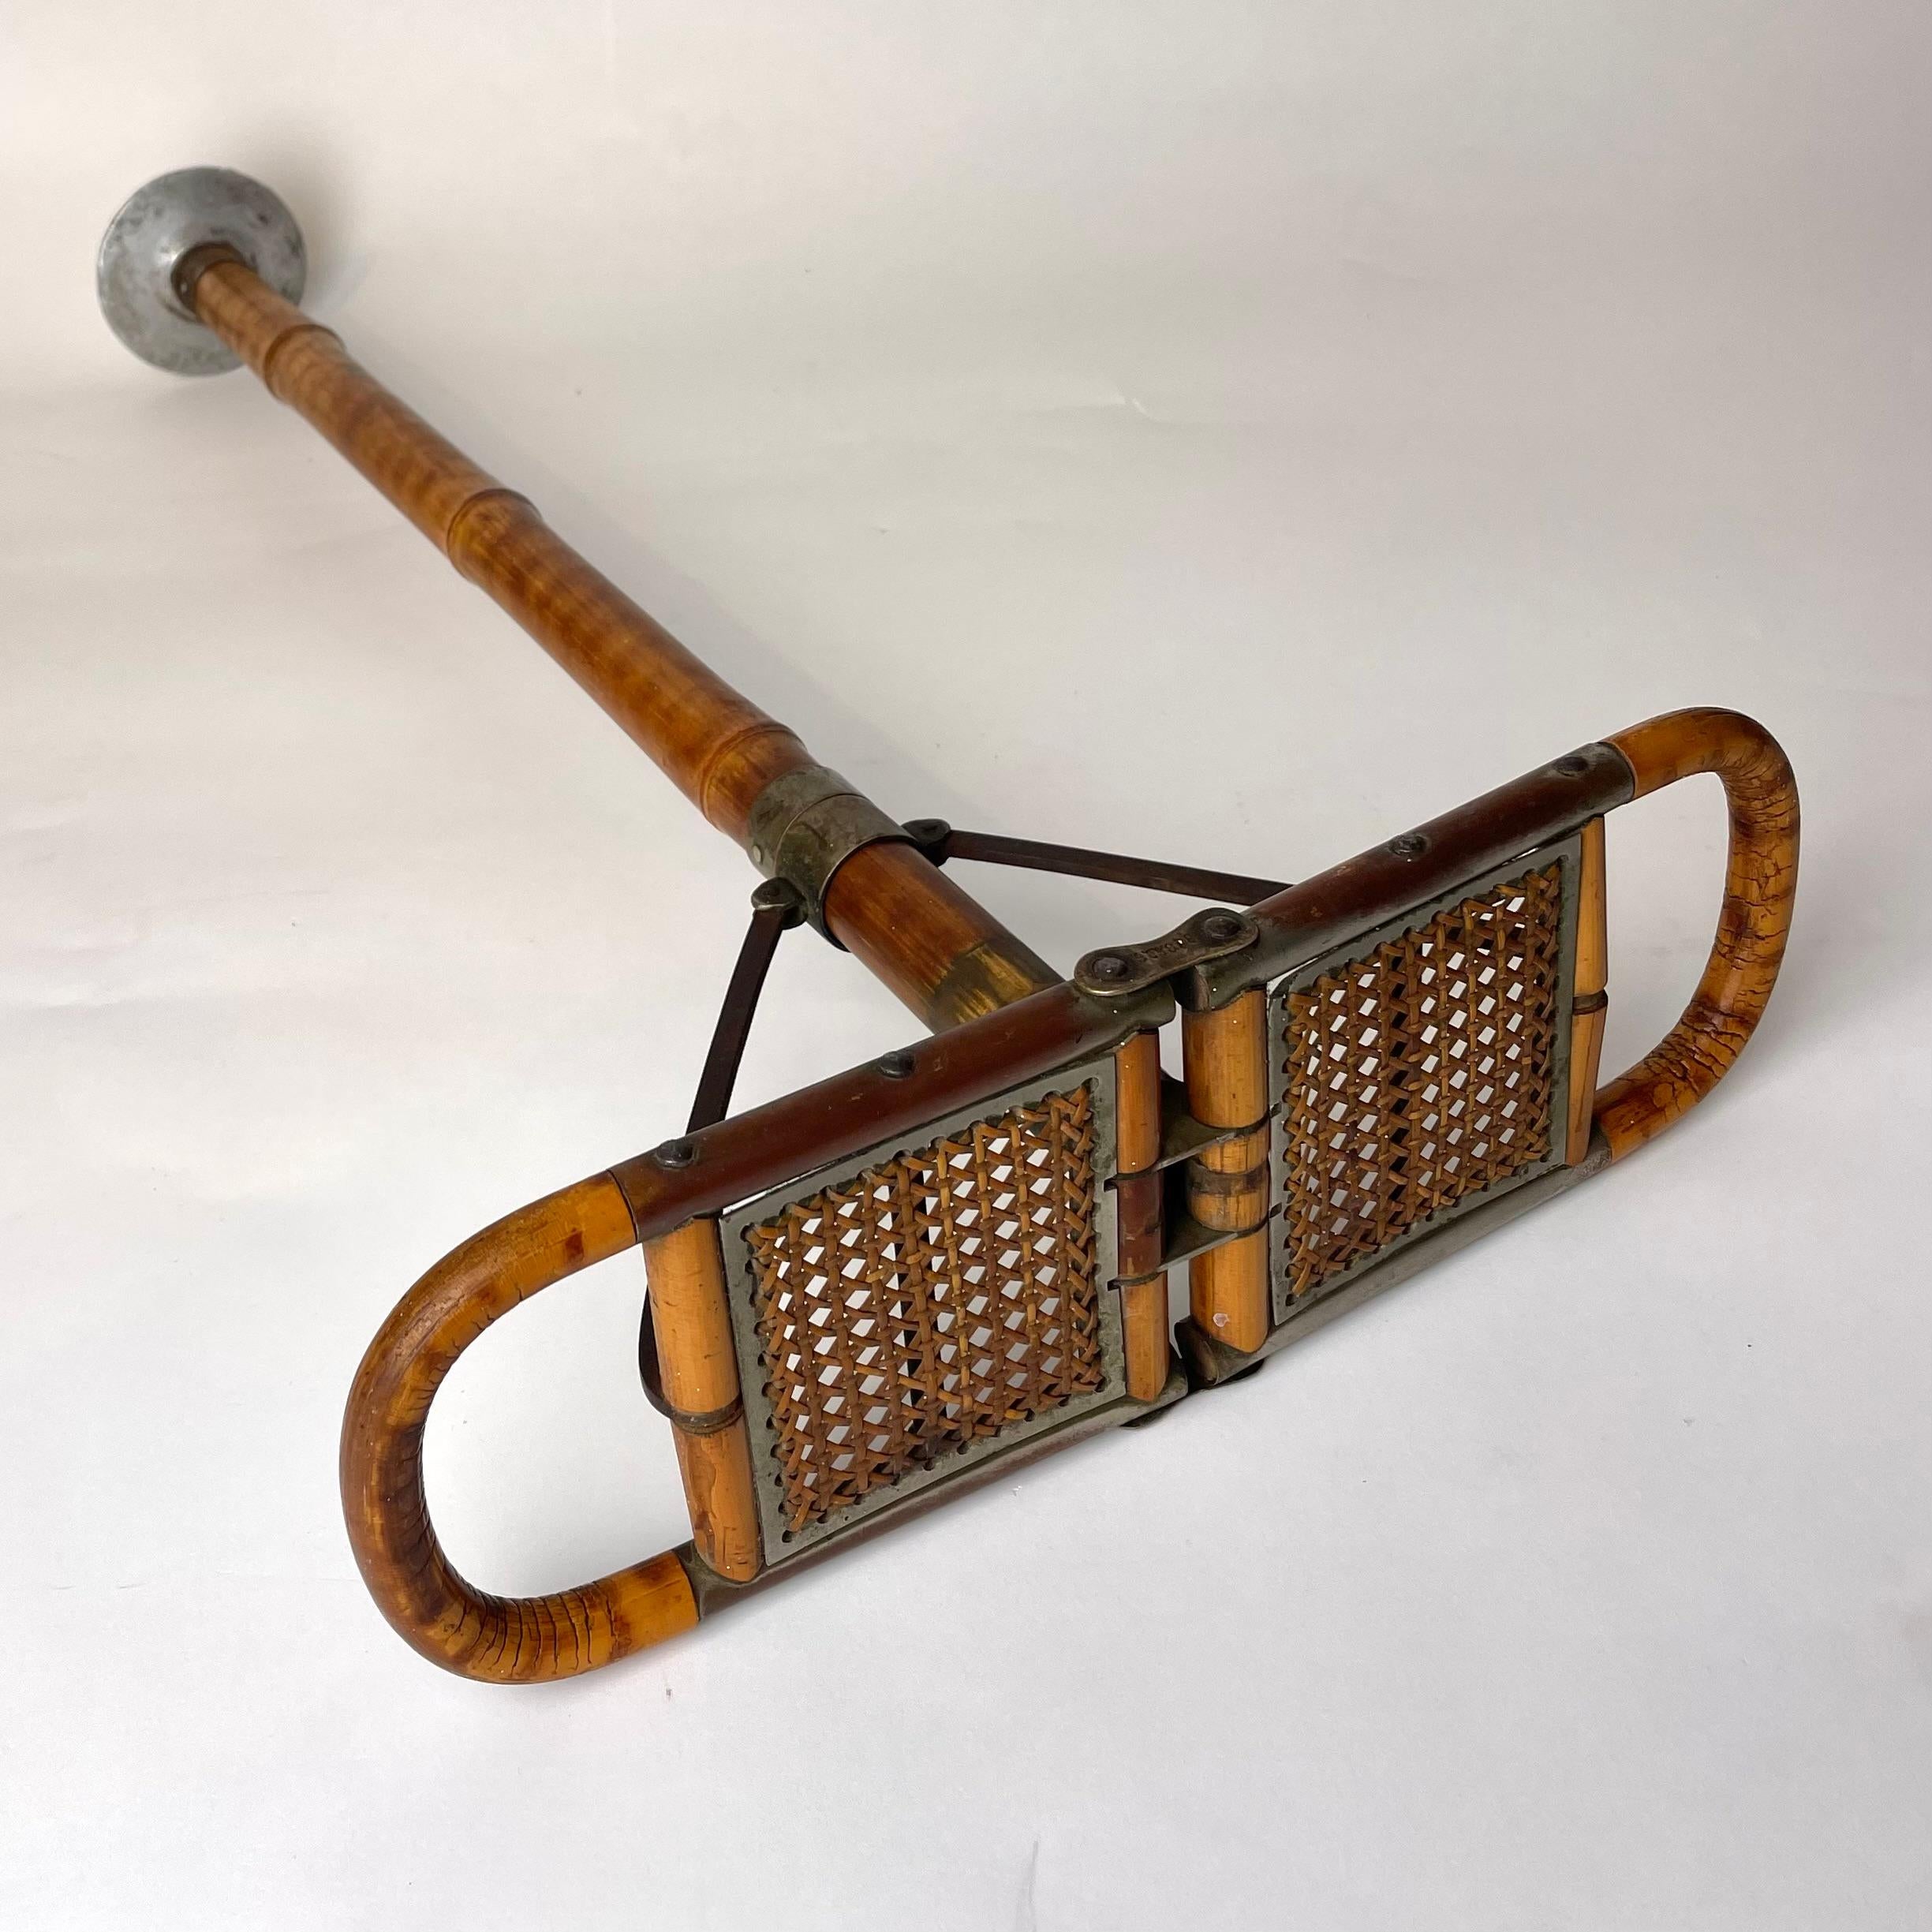 A charming Walking Cane with Folding Seat. Made of Bamboo, Rattan and Iron, late 19th/early 20th Century.

This walking cane has a foldable seat, allowing one to rest while on a walk or hunting. The end, made of iron, is simply thrust into the